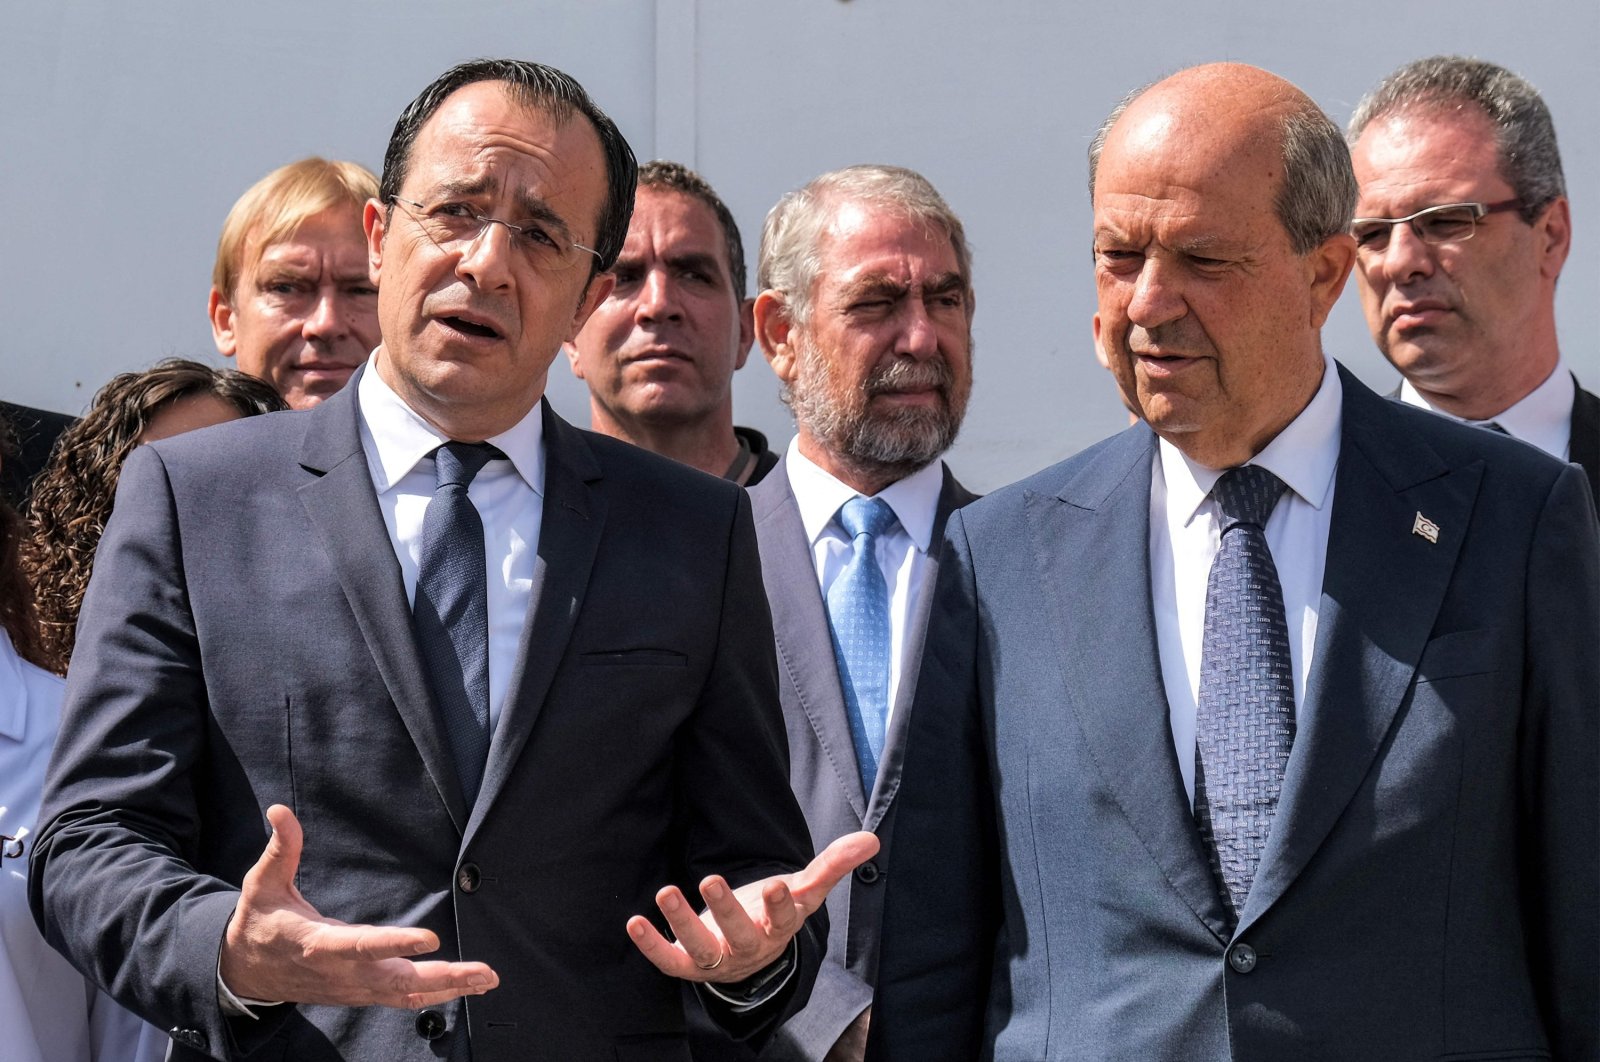 Greek Cypriot President Nikos Christodoulides (L) and Turkish Cypriot leader Ersin Tatar (R) speak to reporters outside the anthropological laboratory of the Committee on Missing Persons in Cyprus (CMP) in the United Nations buffer zone splitting the divided capital Lefkoşa (Nicosia), TRNC, July 28, 2023. (AFP Photo)